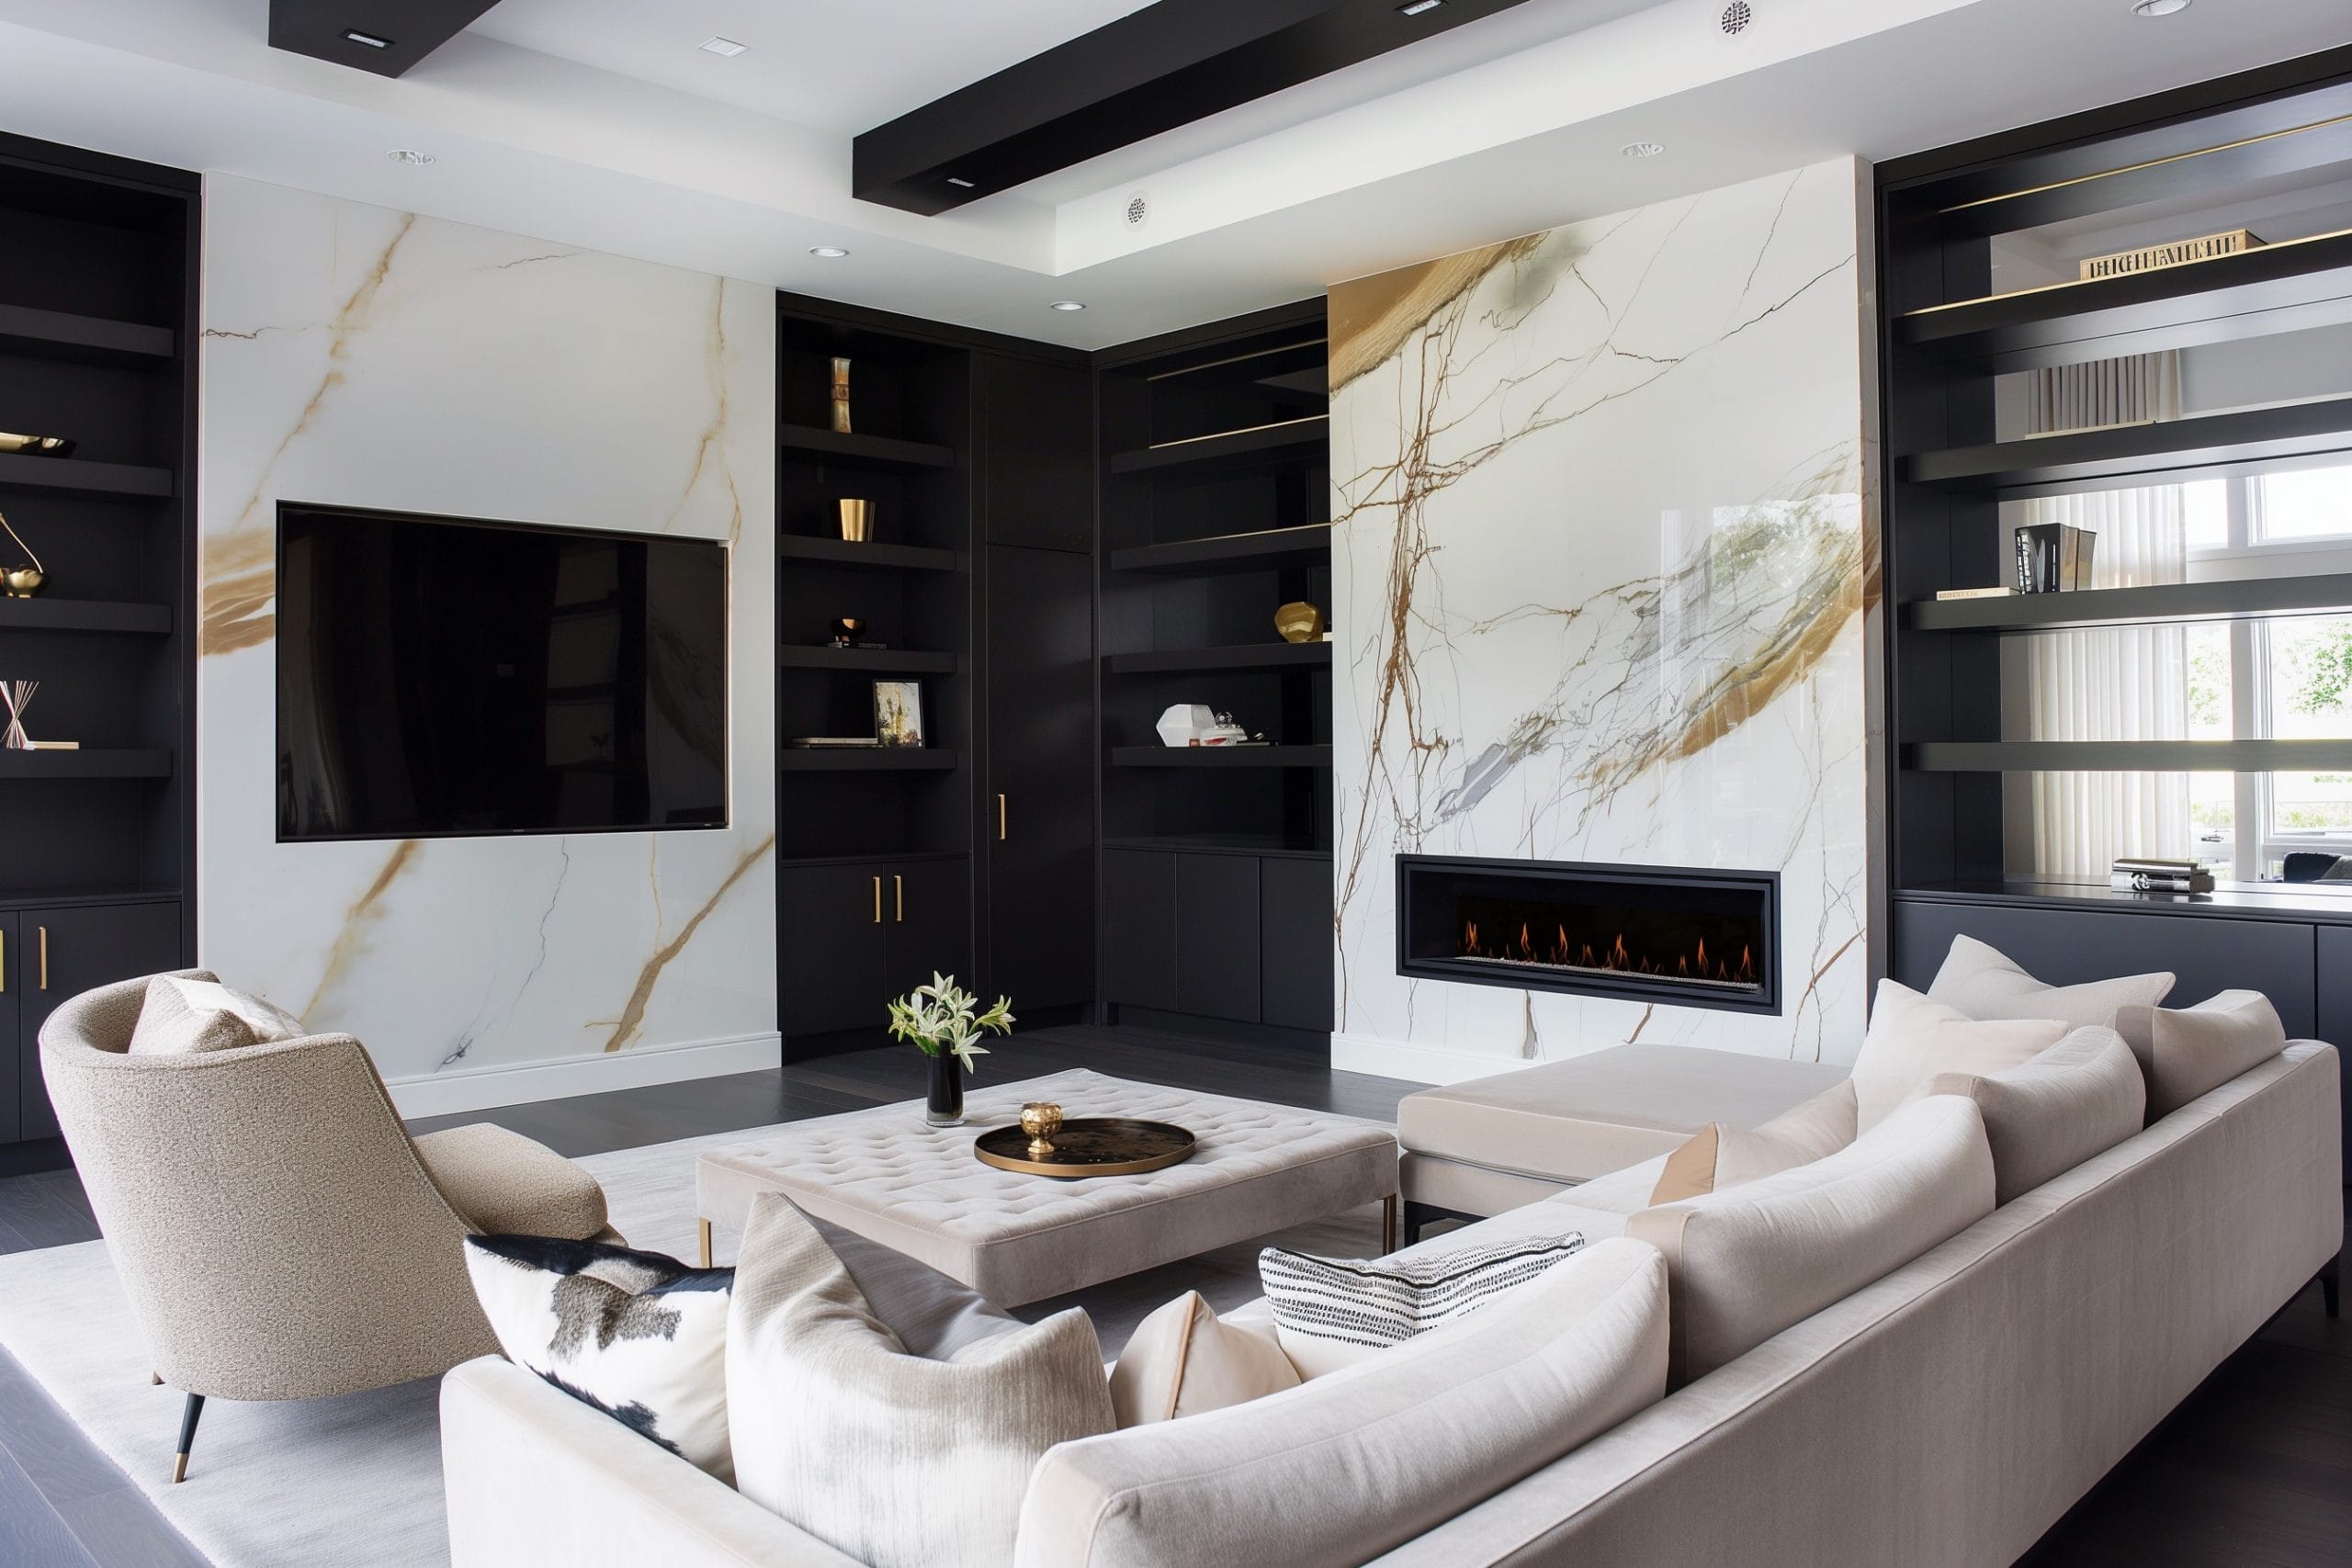 Before & After: Luxury New Construction Interior Design